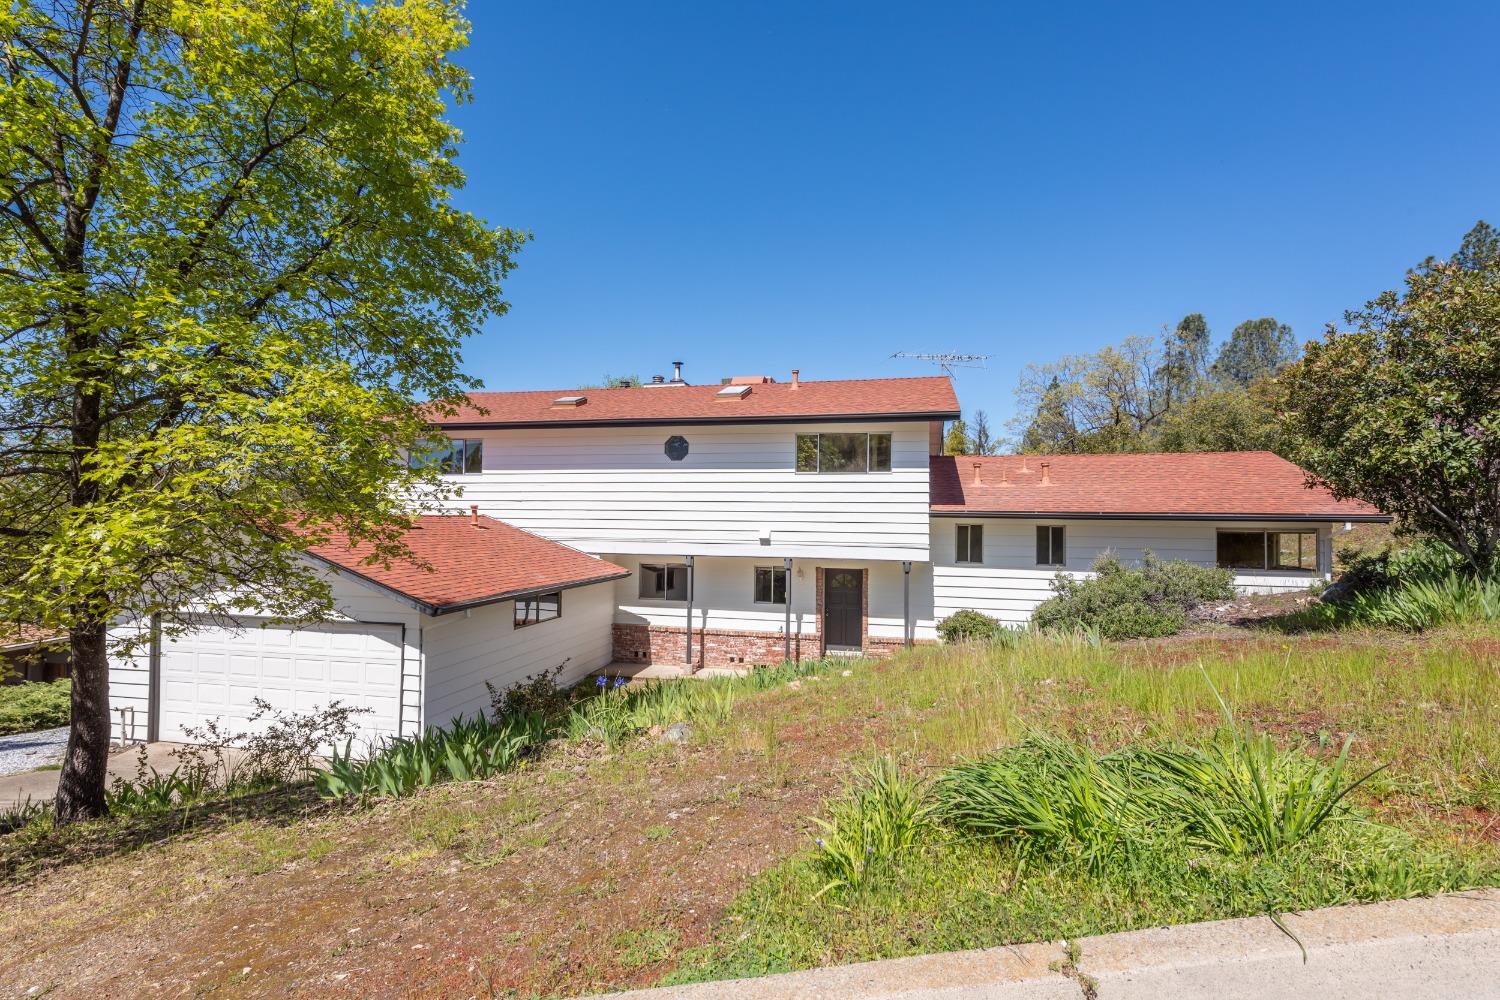 Photo of 2820 Northridge Dr in Placerville, CA